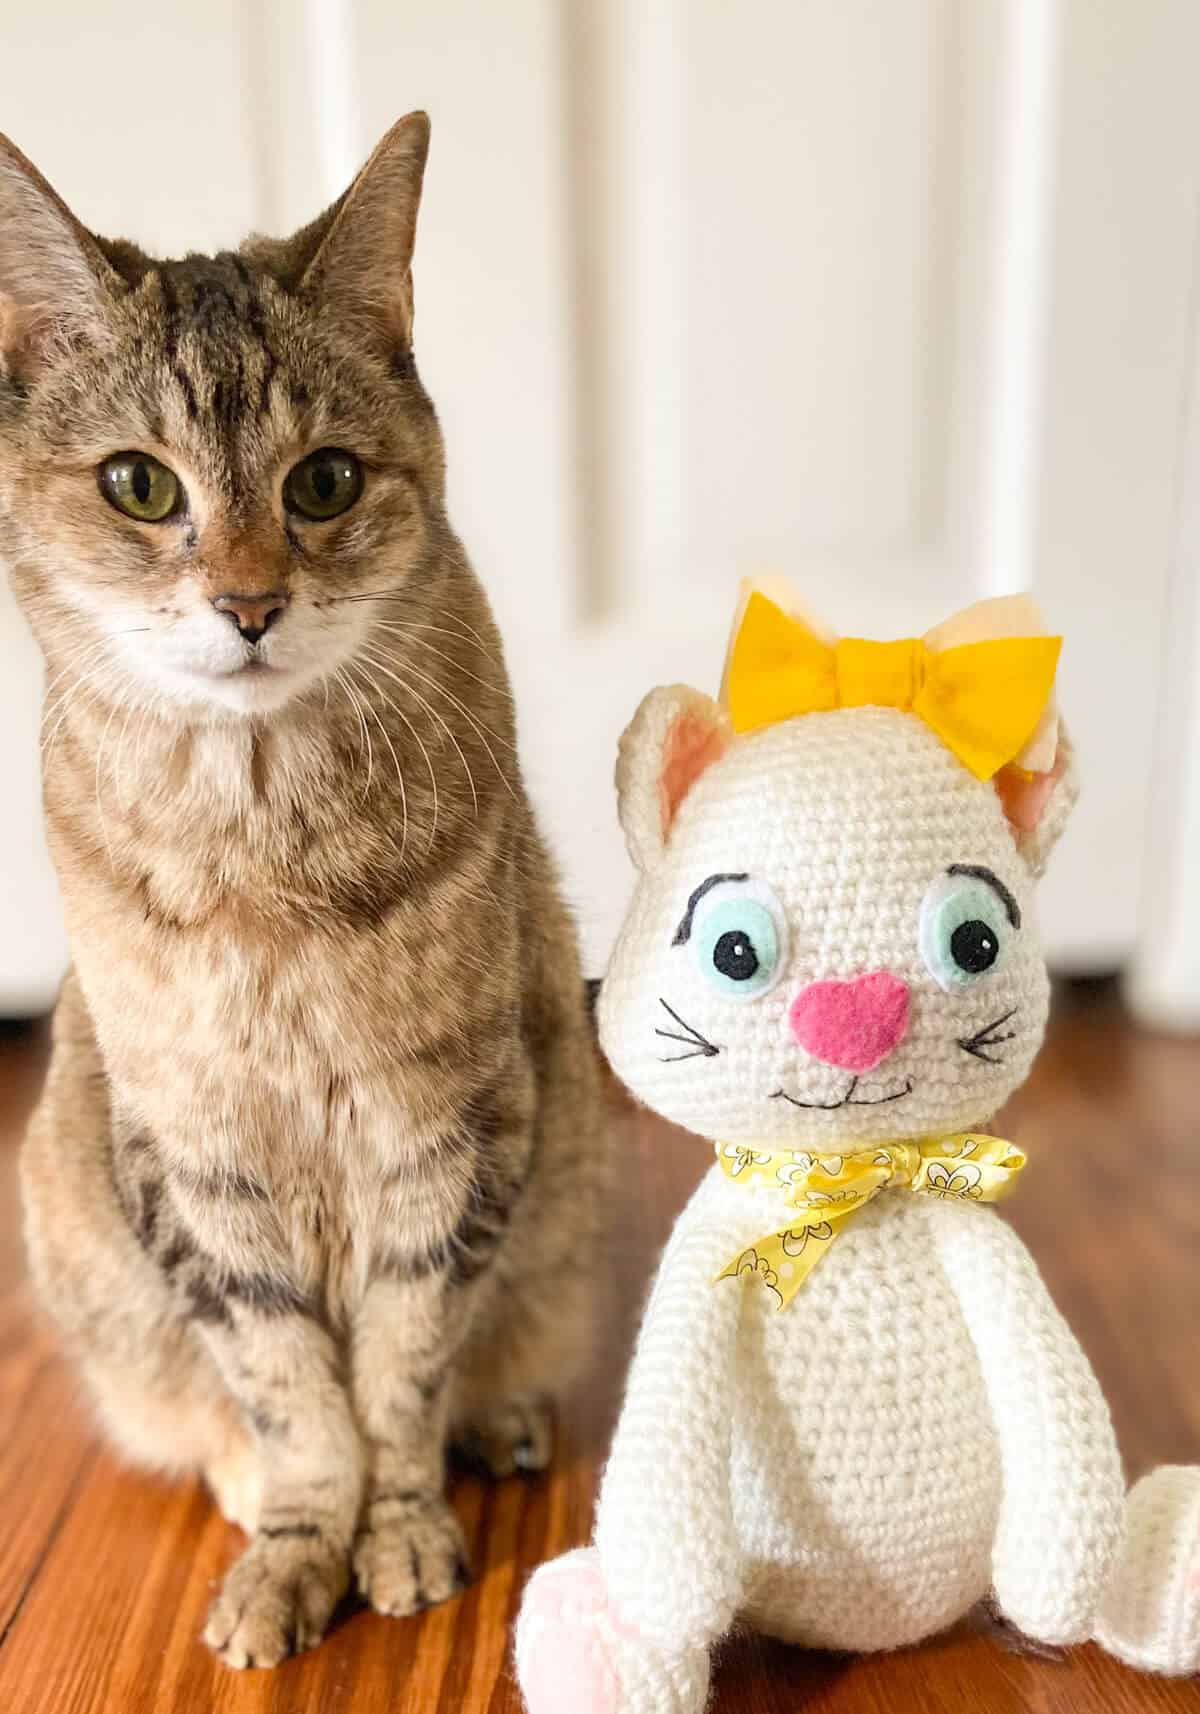 Our Pearly cat sitting next to doll.